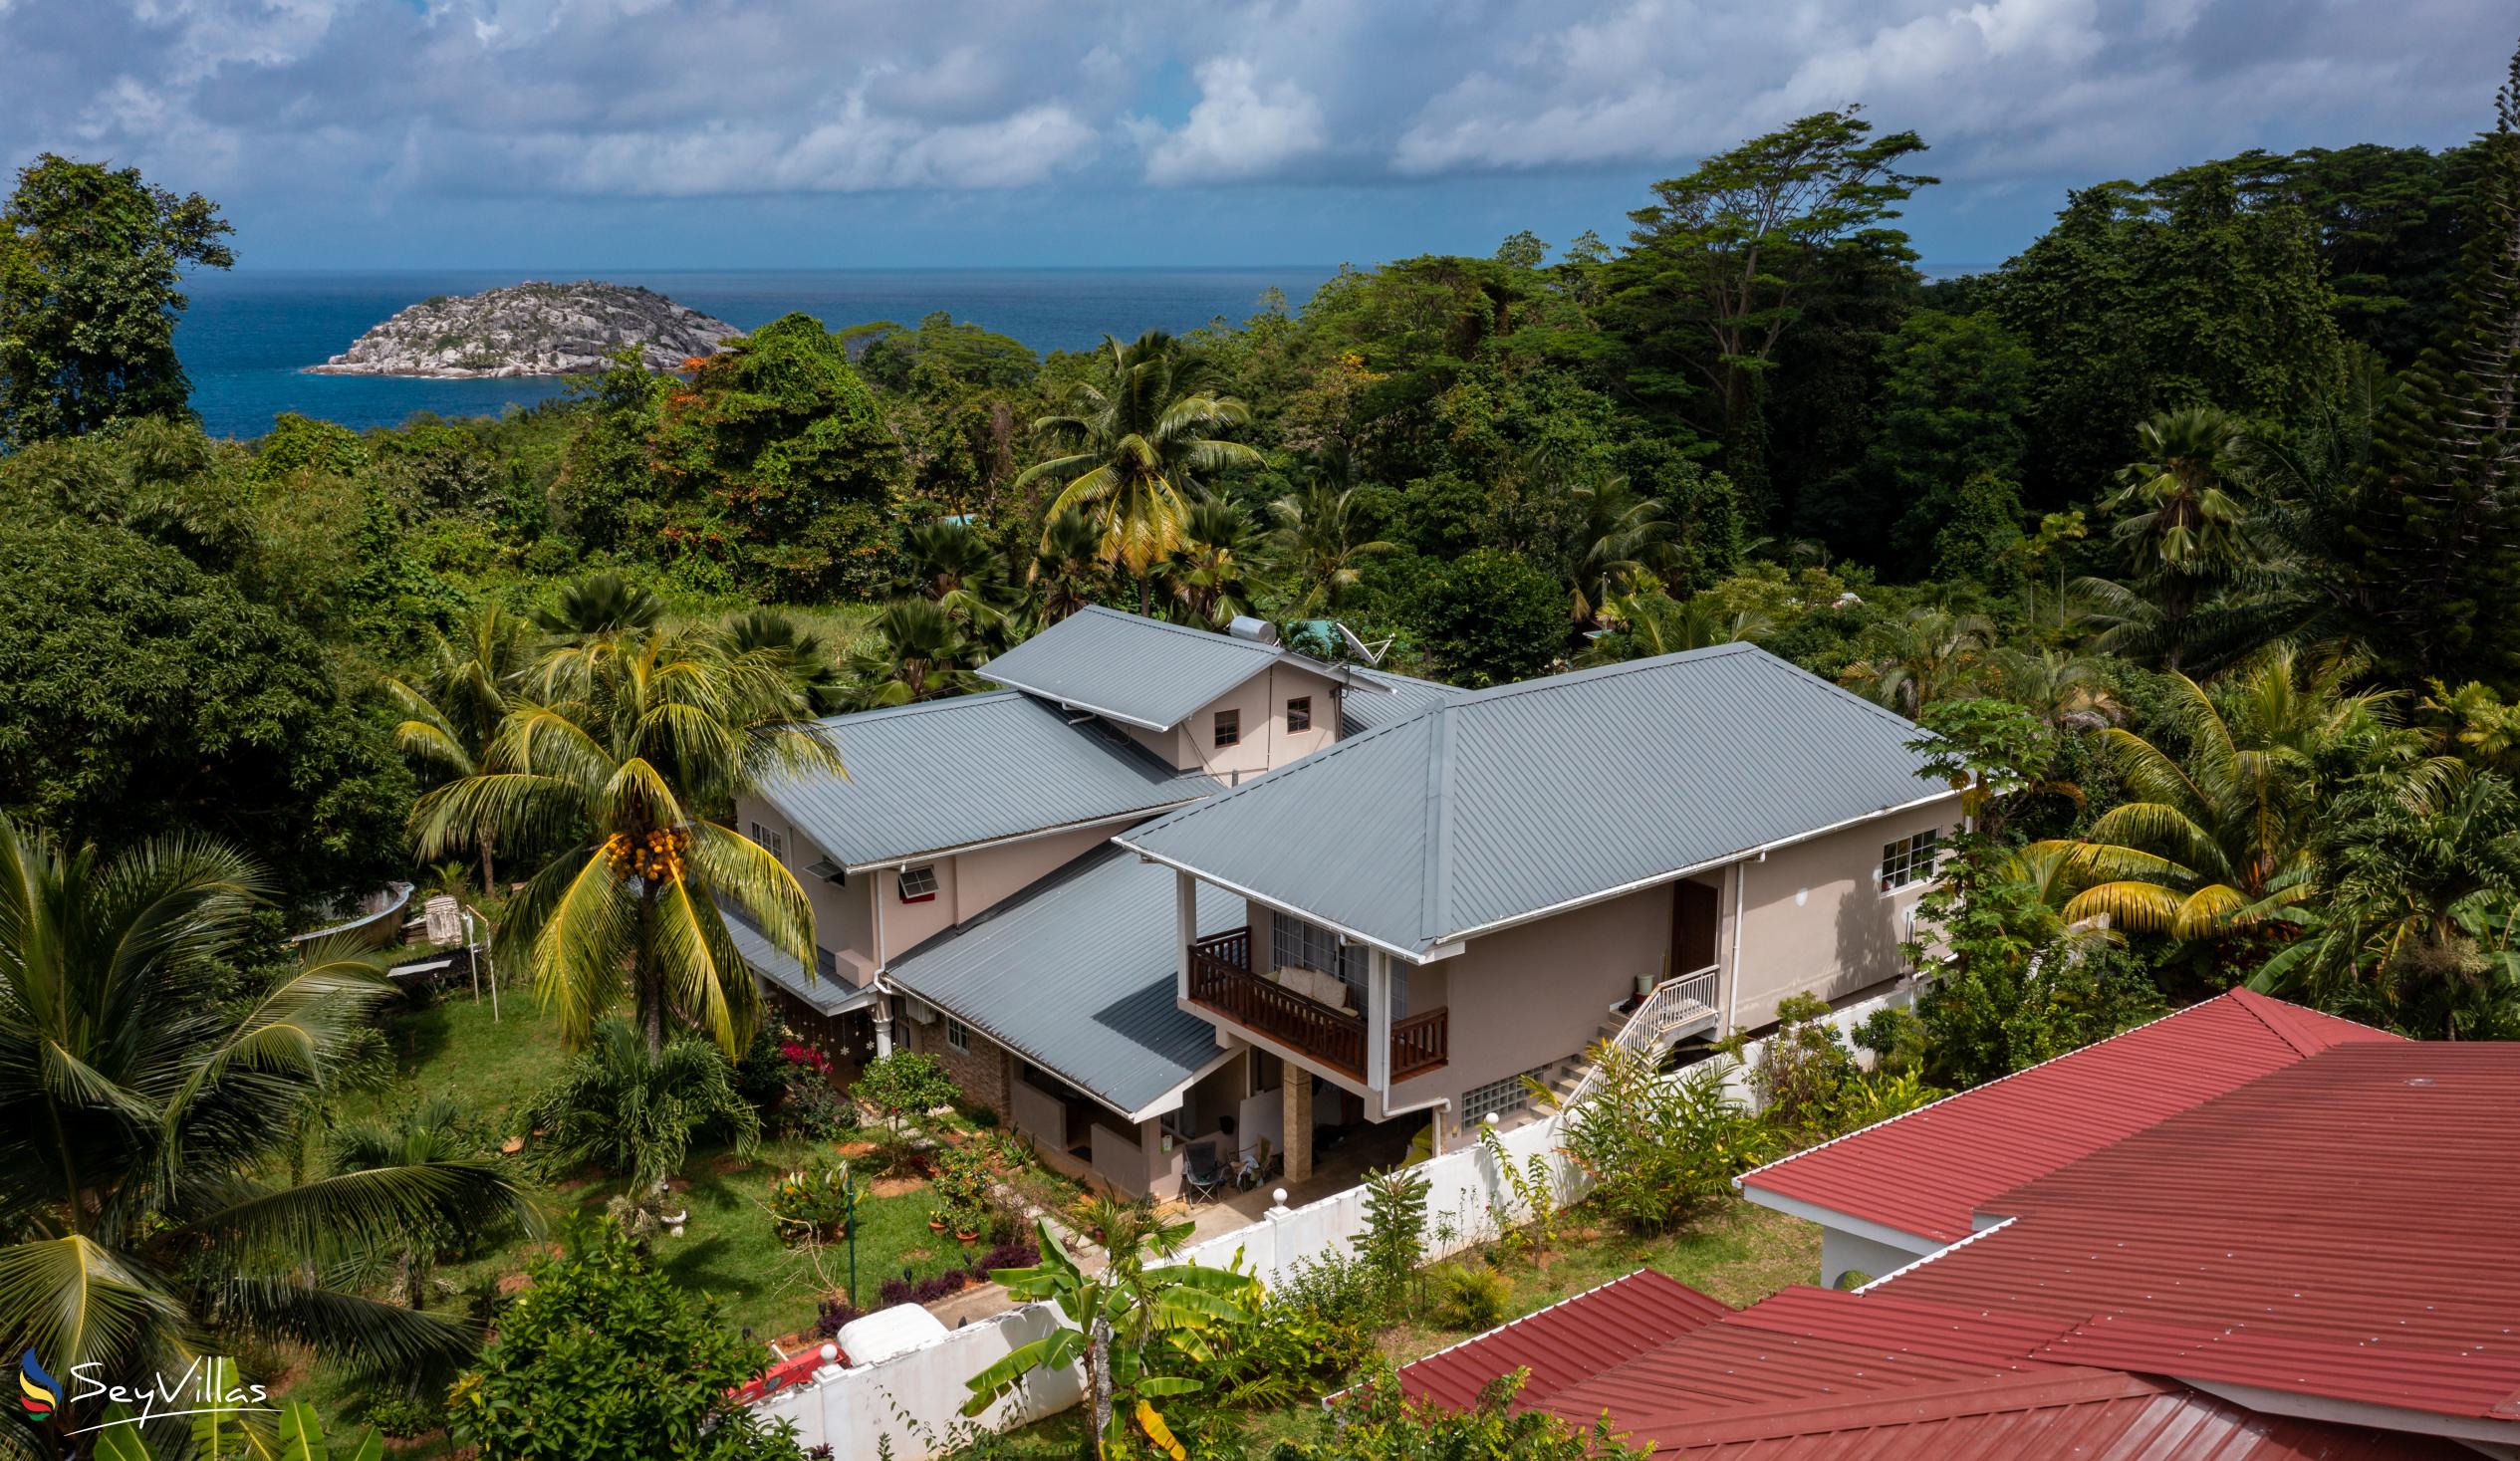 Photo 37: Ogumka Self Catering Beoliere - Location - Mahé (Seychelles)